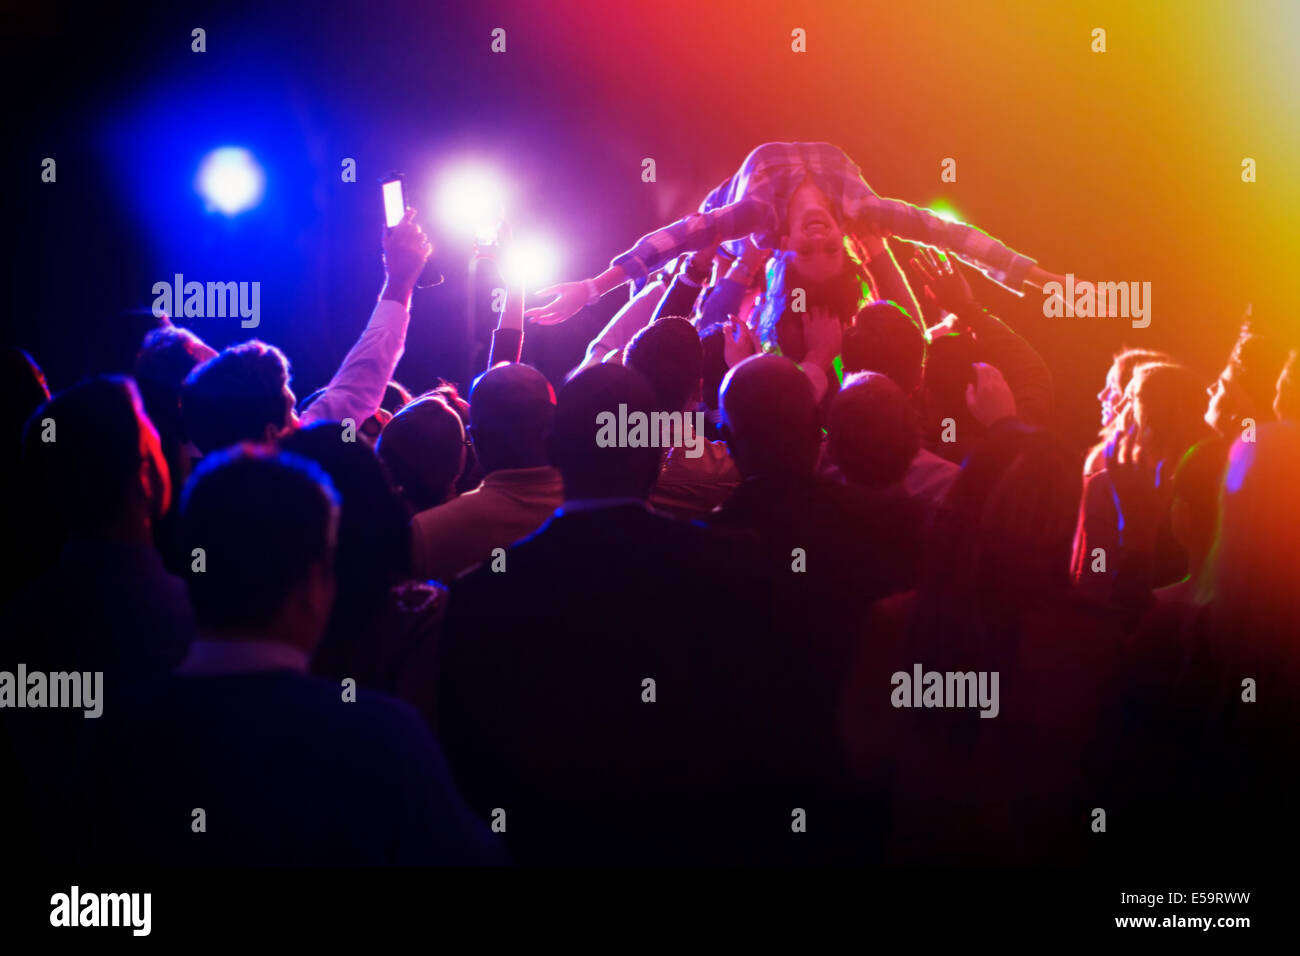 Woman crowd surfing at concert Stock Photo